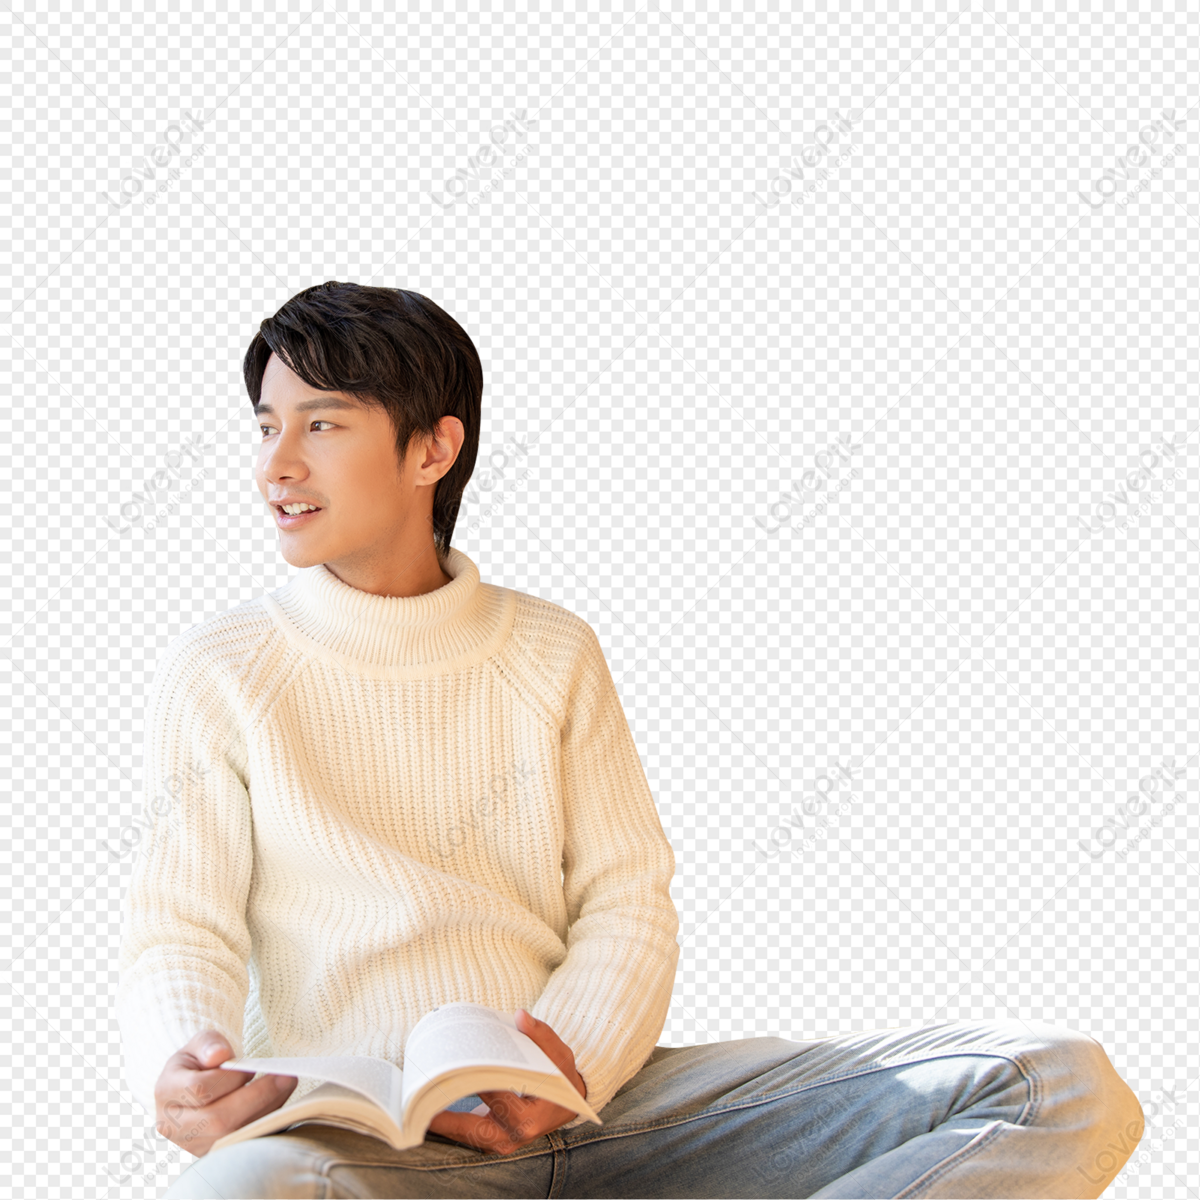 Male sitting on library floor and reading book, young, leisure office, book png transparent image